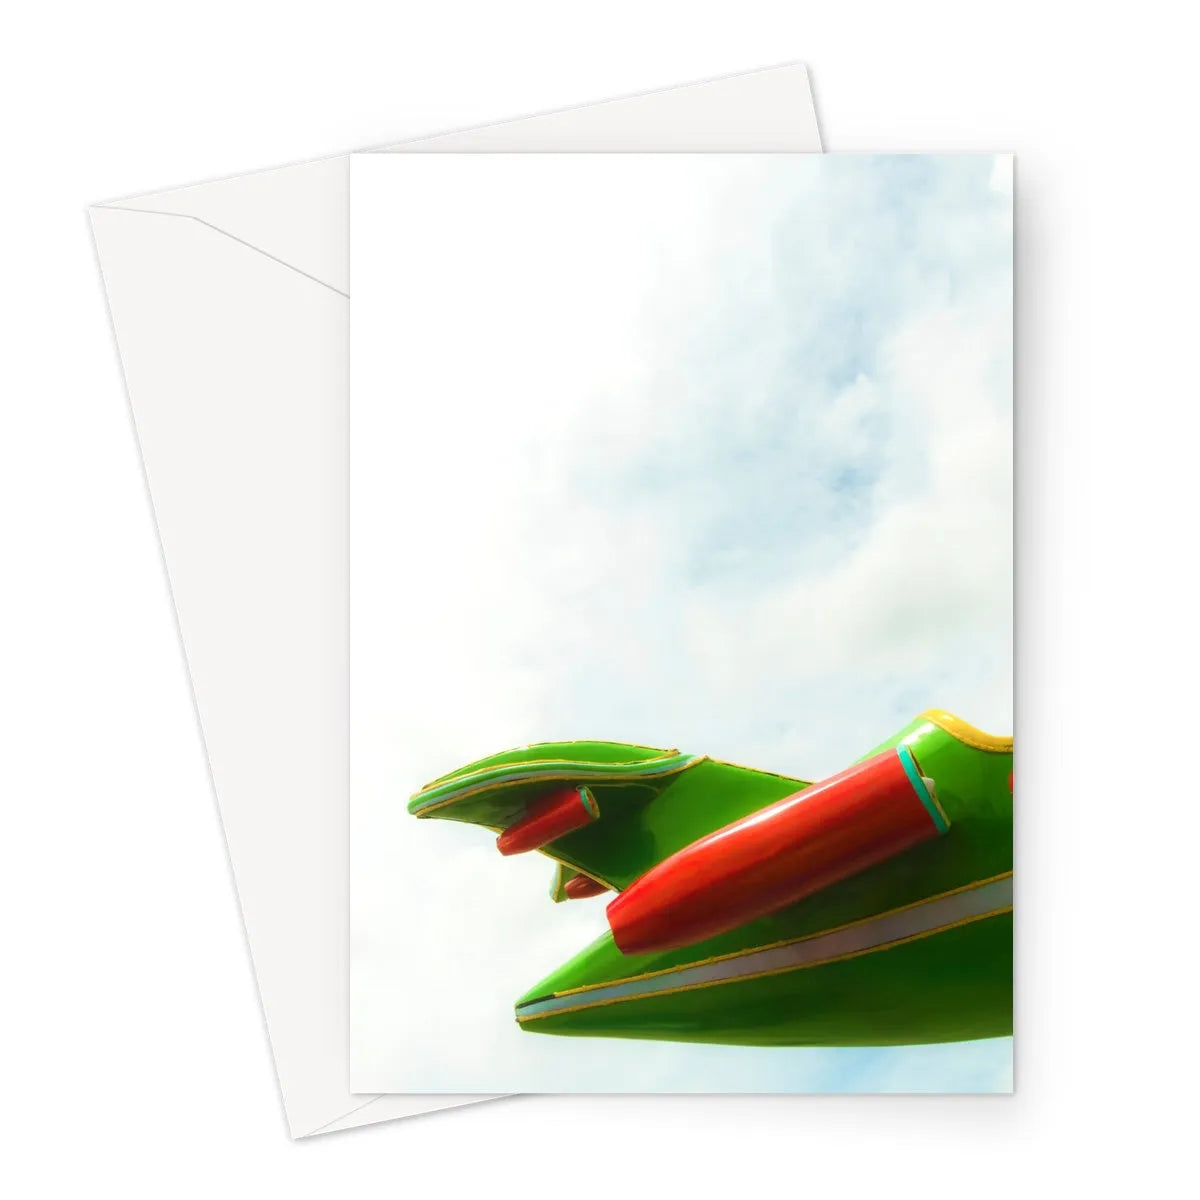 Flying High 3 Greeting Card - A5 Portrait / 1 Card - Greeting & Note Cards - Aesthetic Art